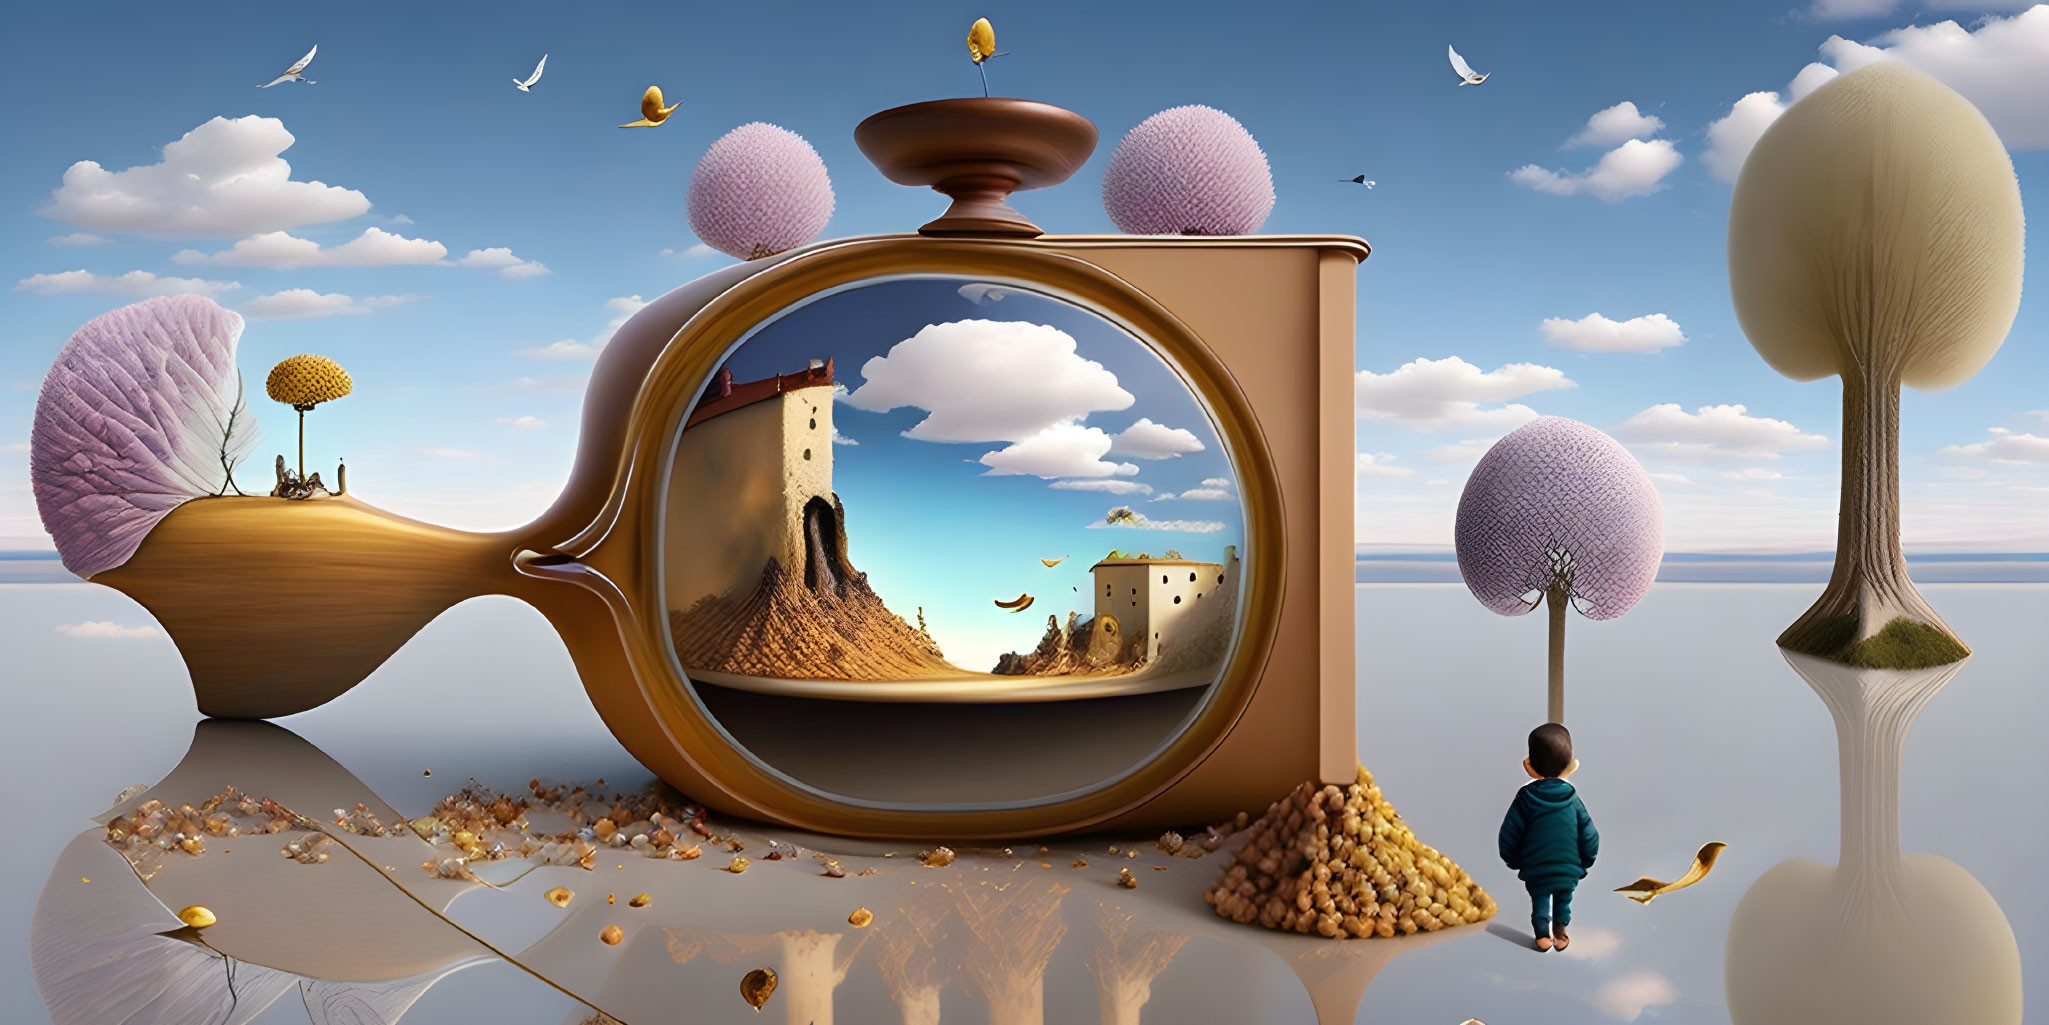 Child admires surreal landscape in giant pocket watch with whimsical elements